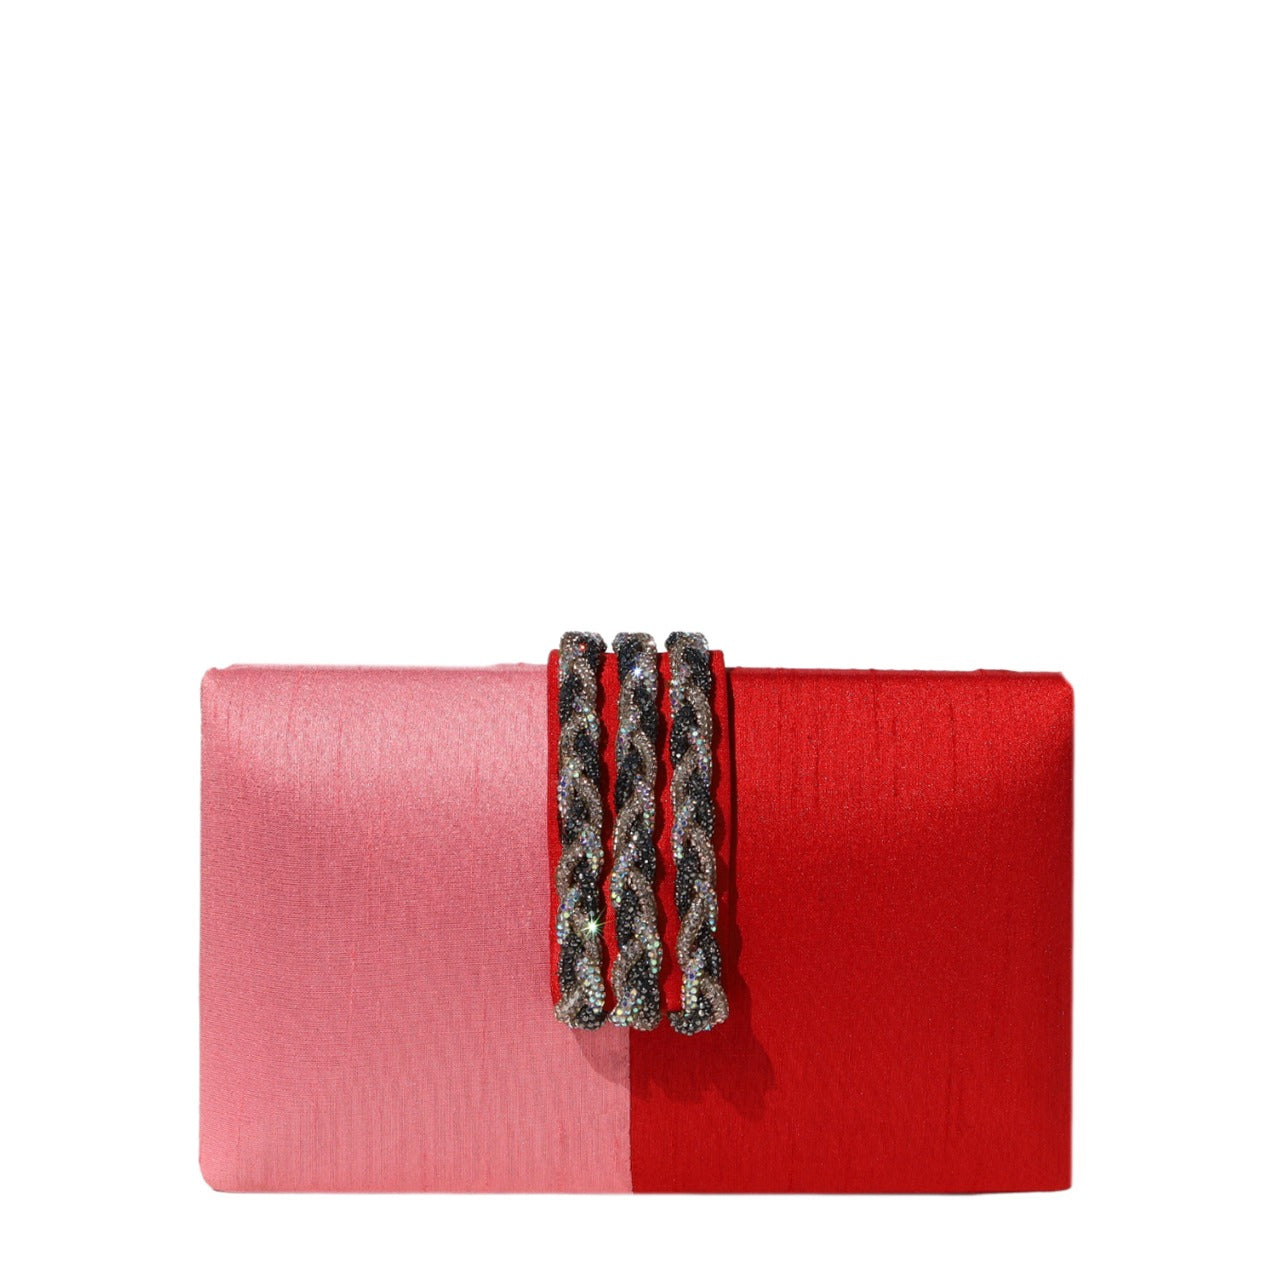 Coral Clutch by Simitri